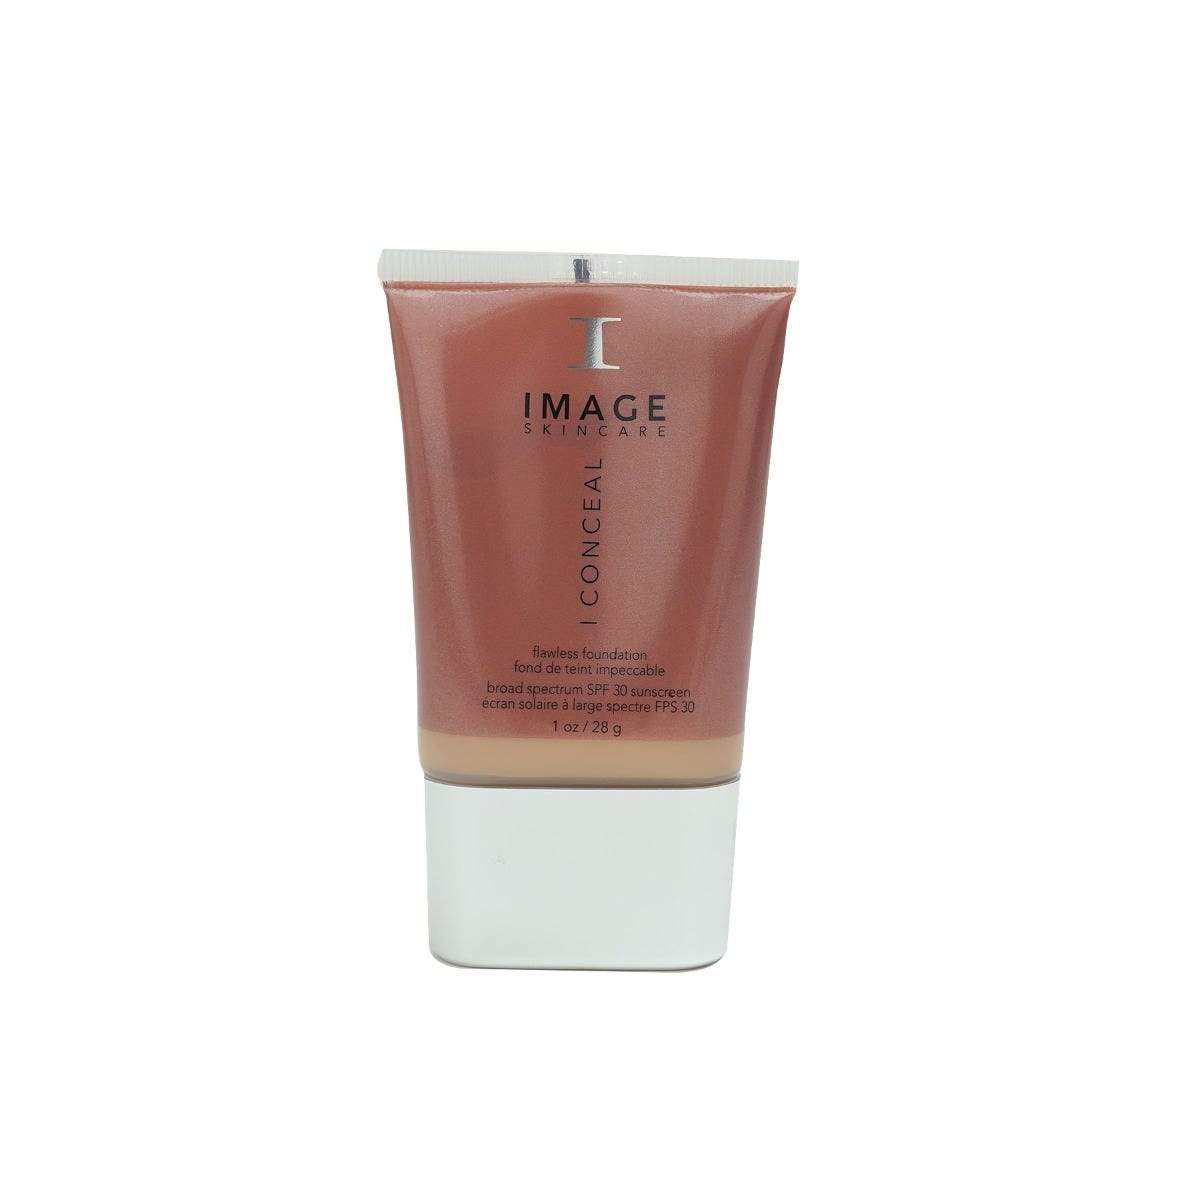 I CONCEAL flawless foundation broad-spectrum SPF 30 sunscreen natural